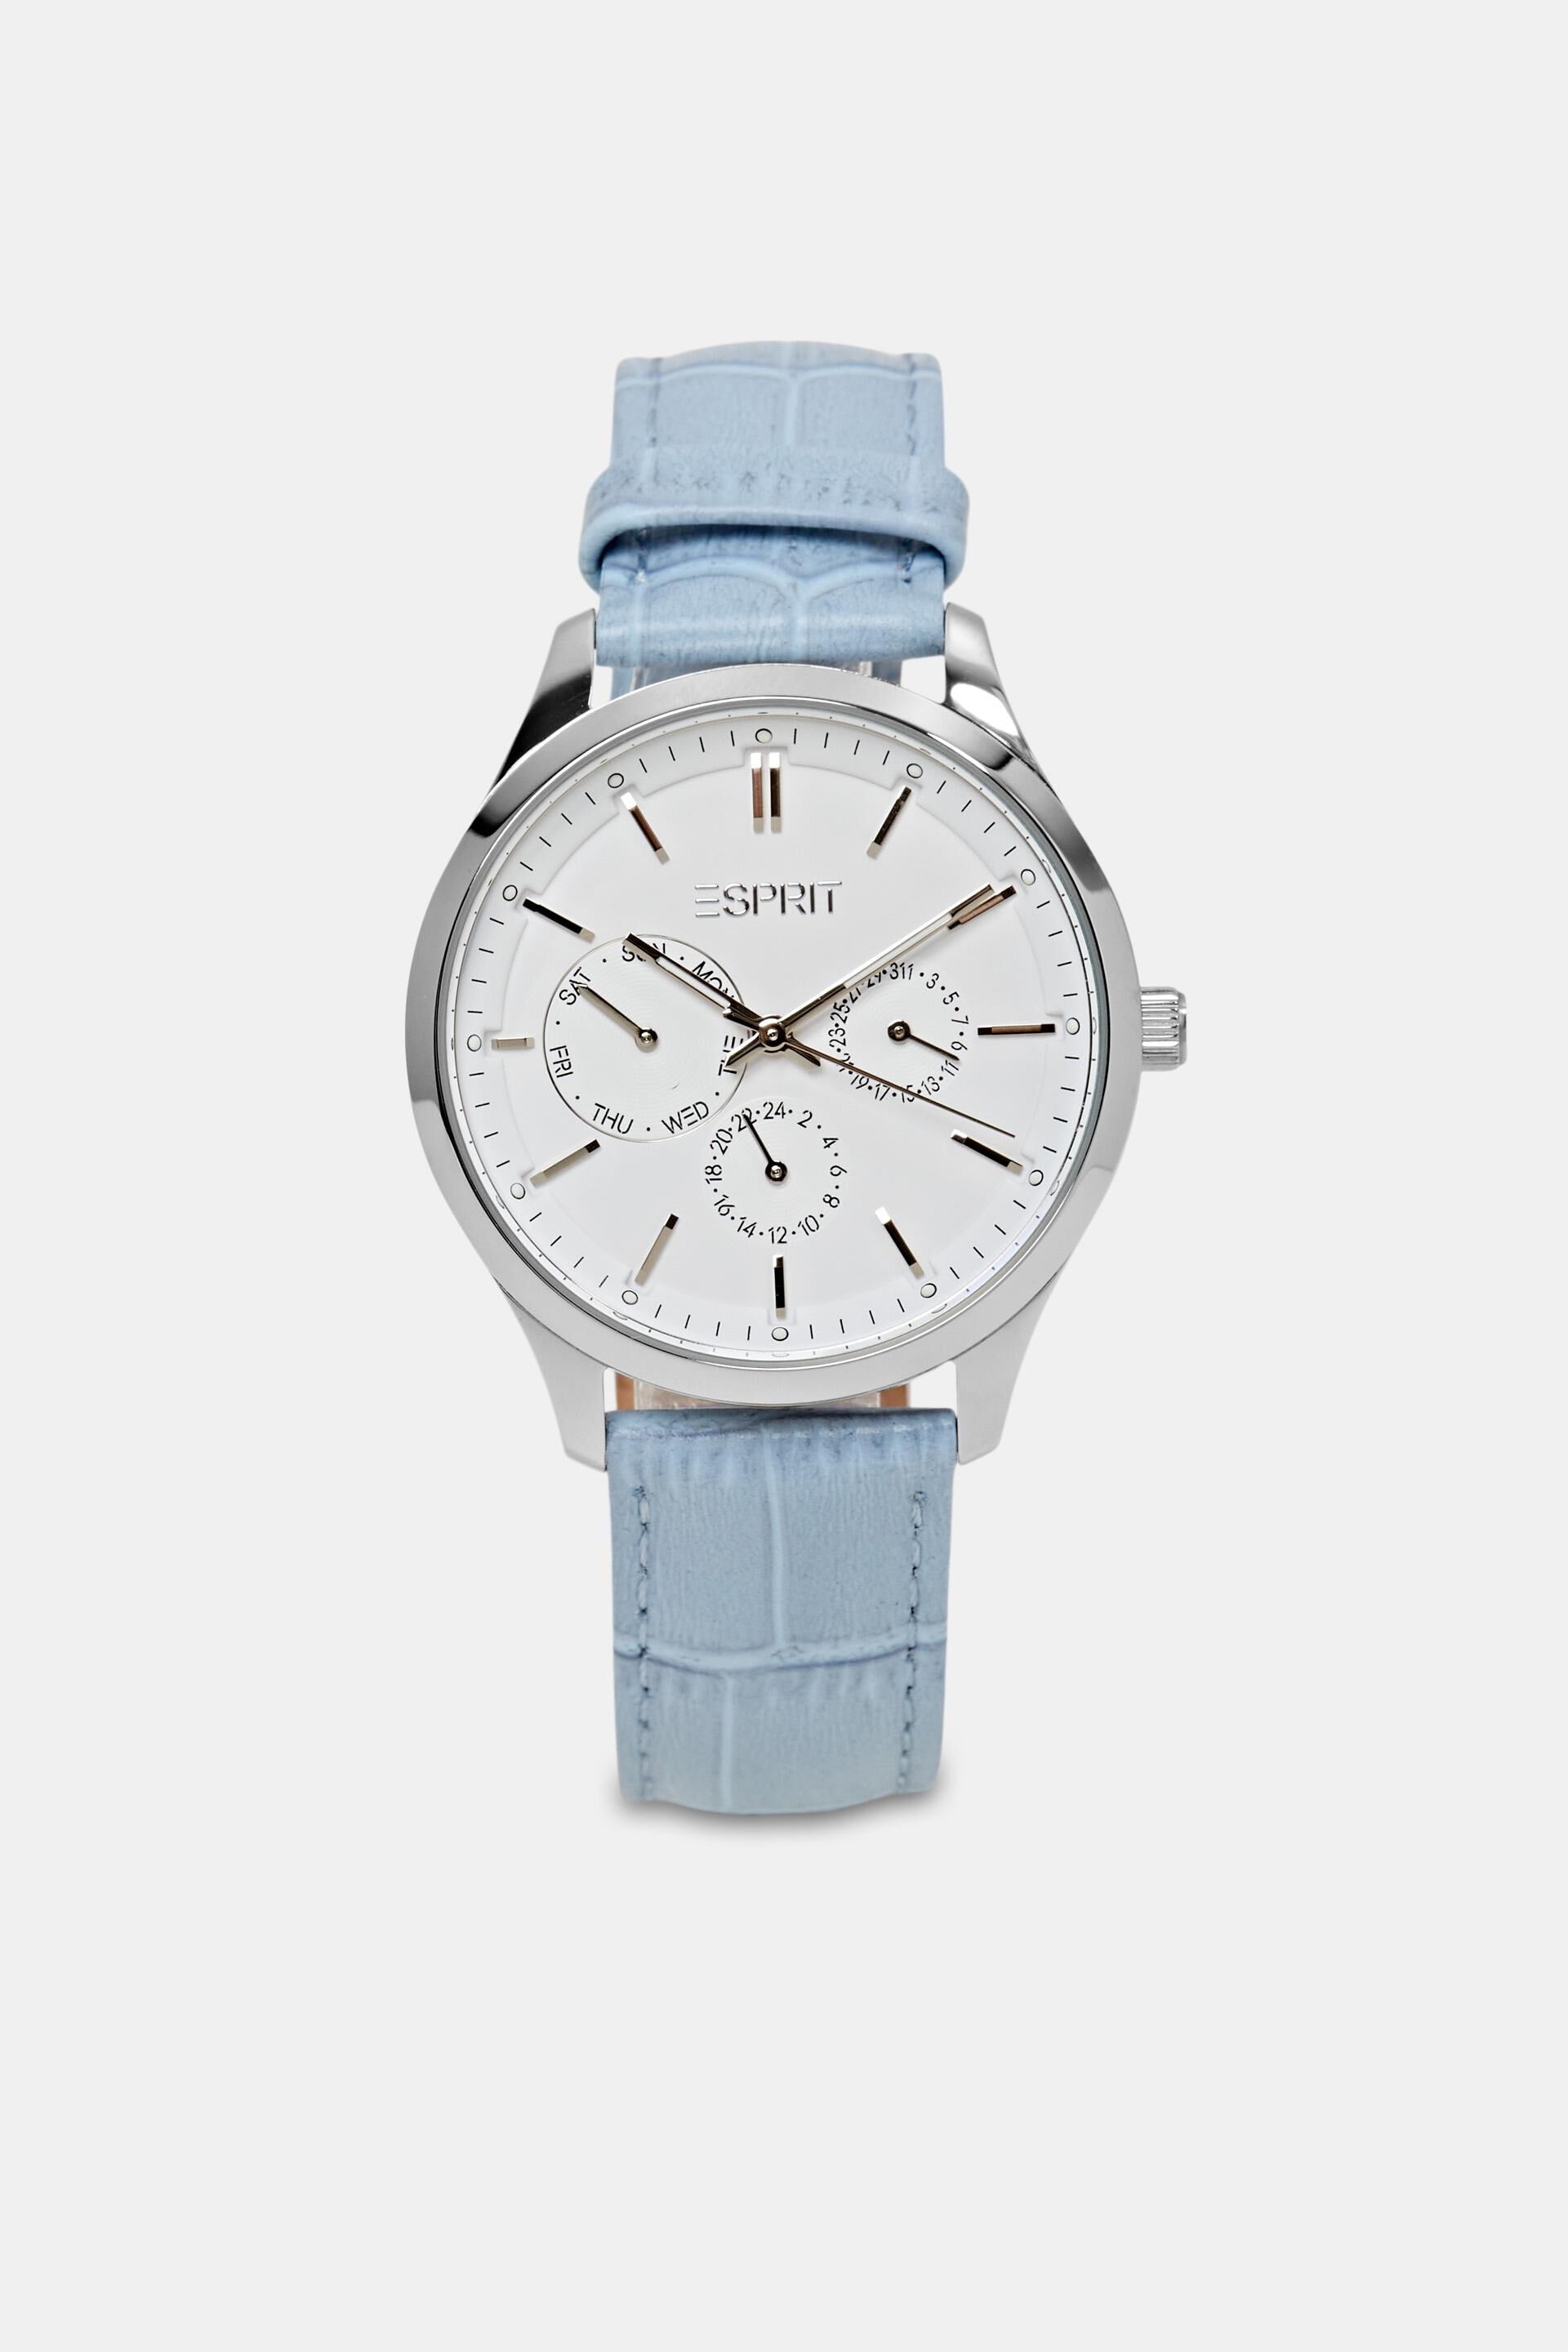 Esprit Online Store Multi-functional watch with a leather strap